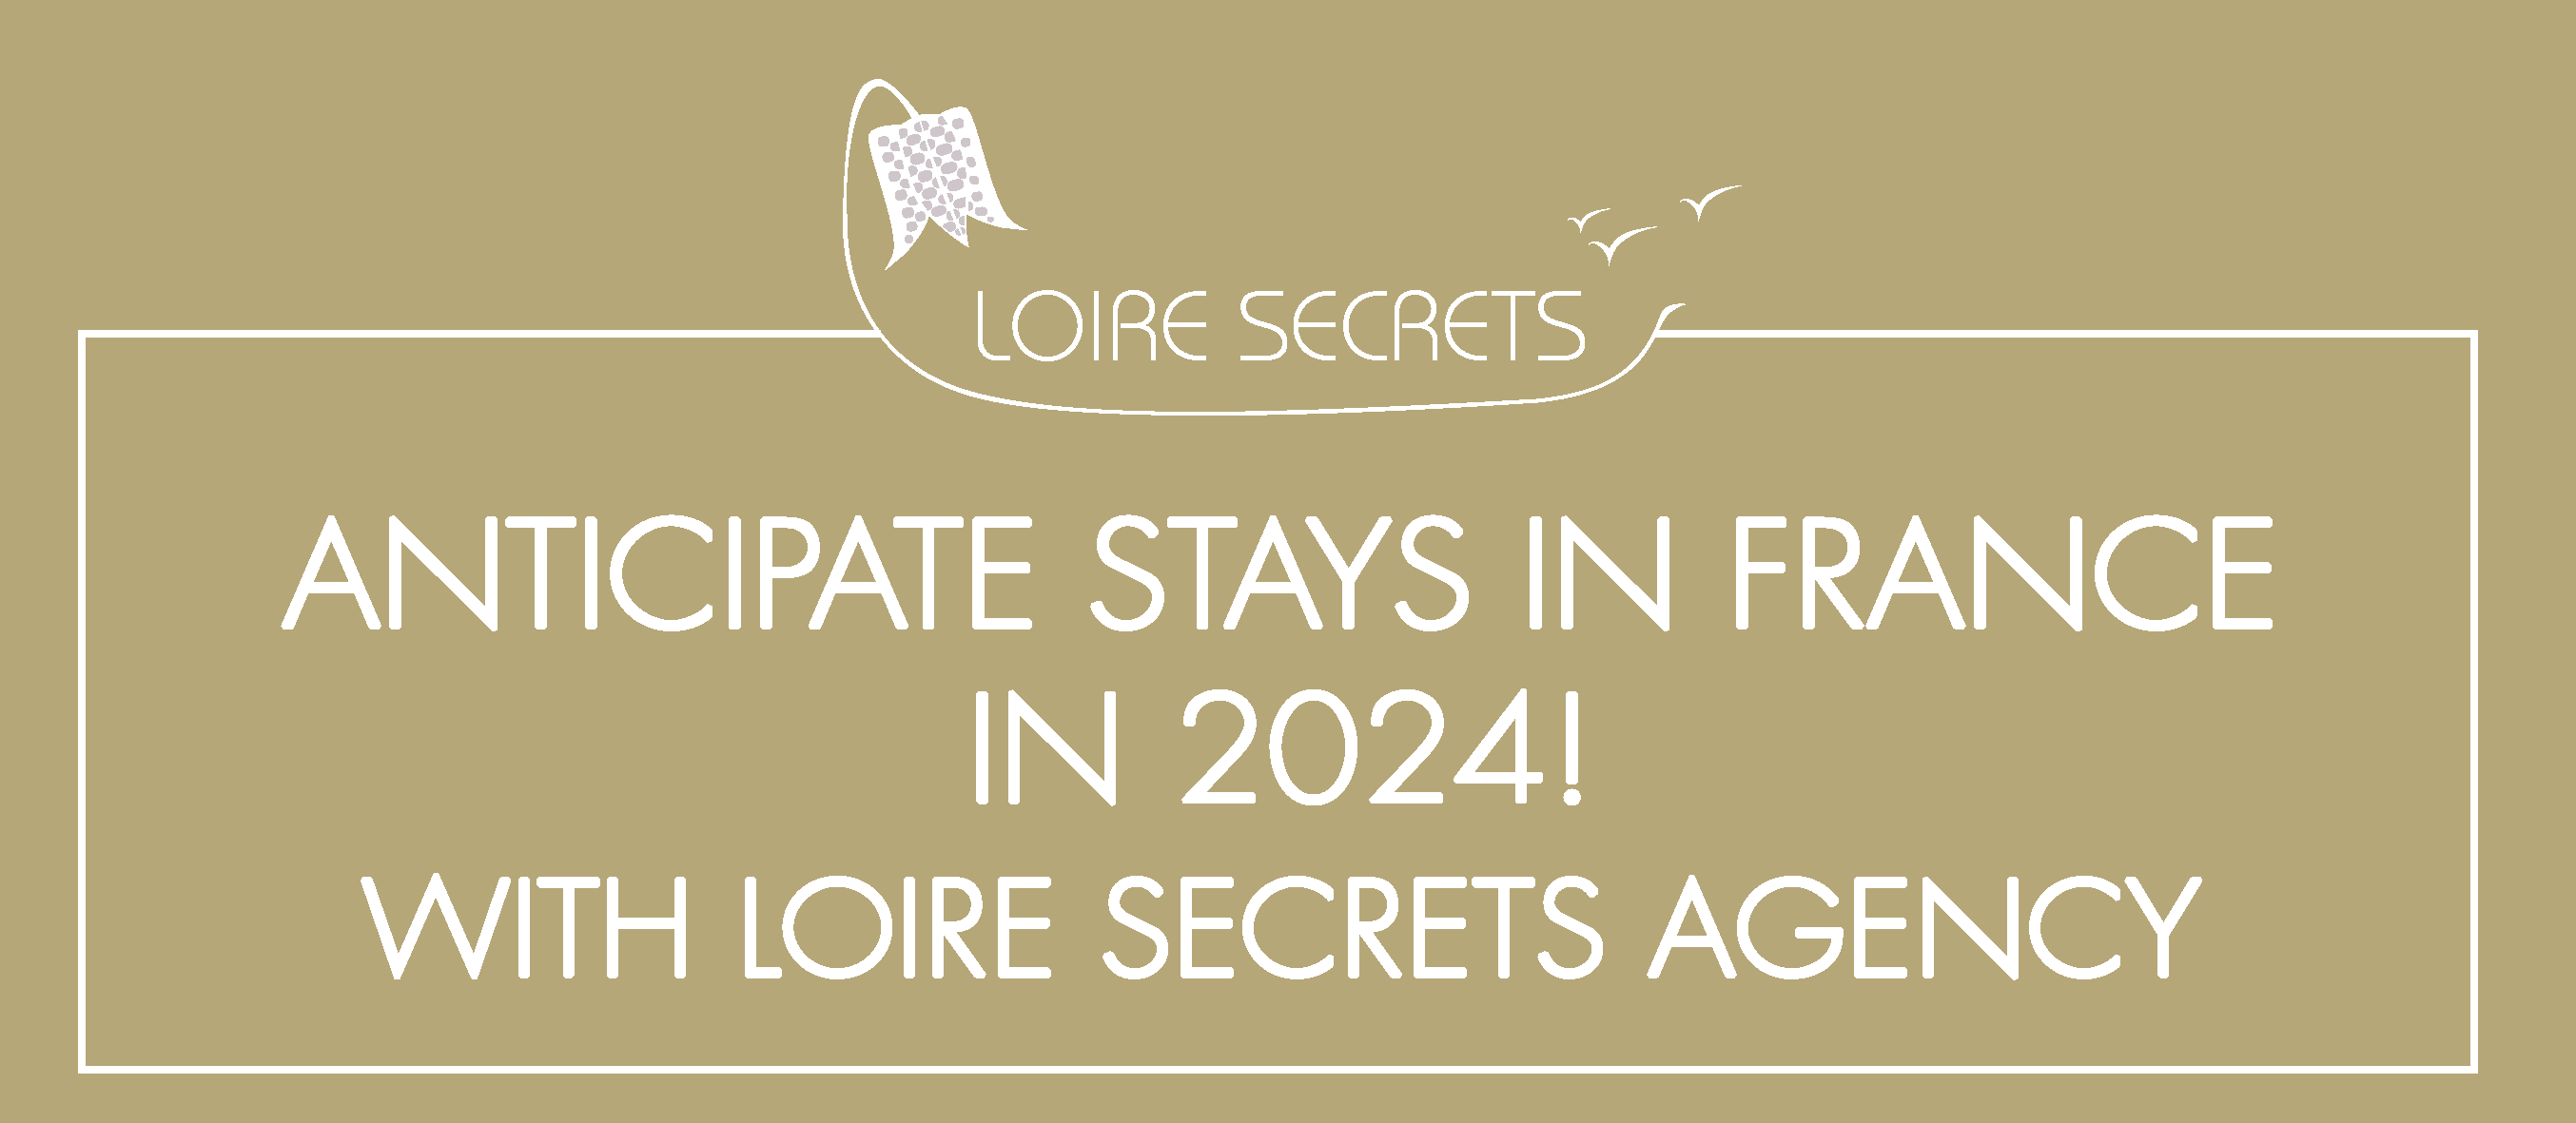 You are currently viewing Anticipate stays in France in 2024, with Loire Secrets Agency